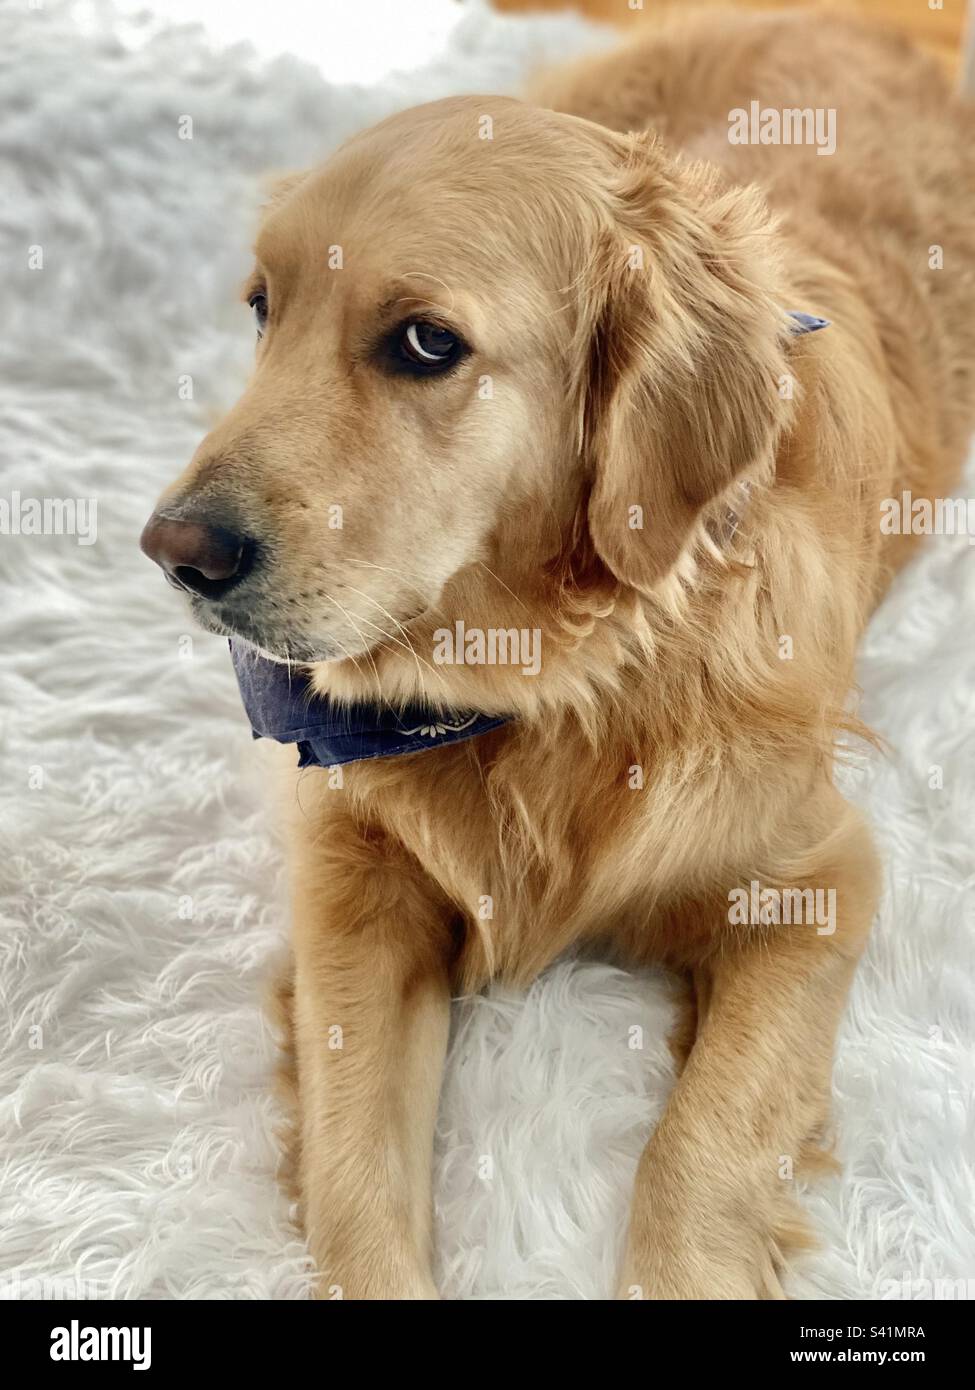 Golden Retriever dog in blue bandana, giving the sideways puppy dog eyes, while laying on a white faux sheepskin rug Stock Photo